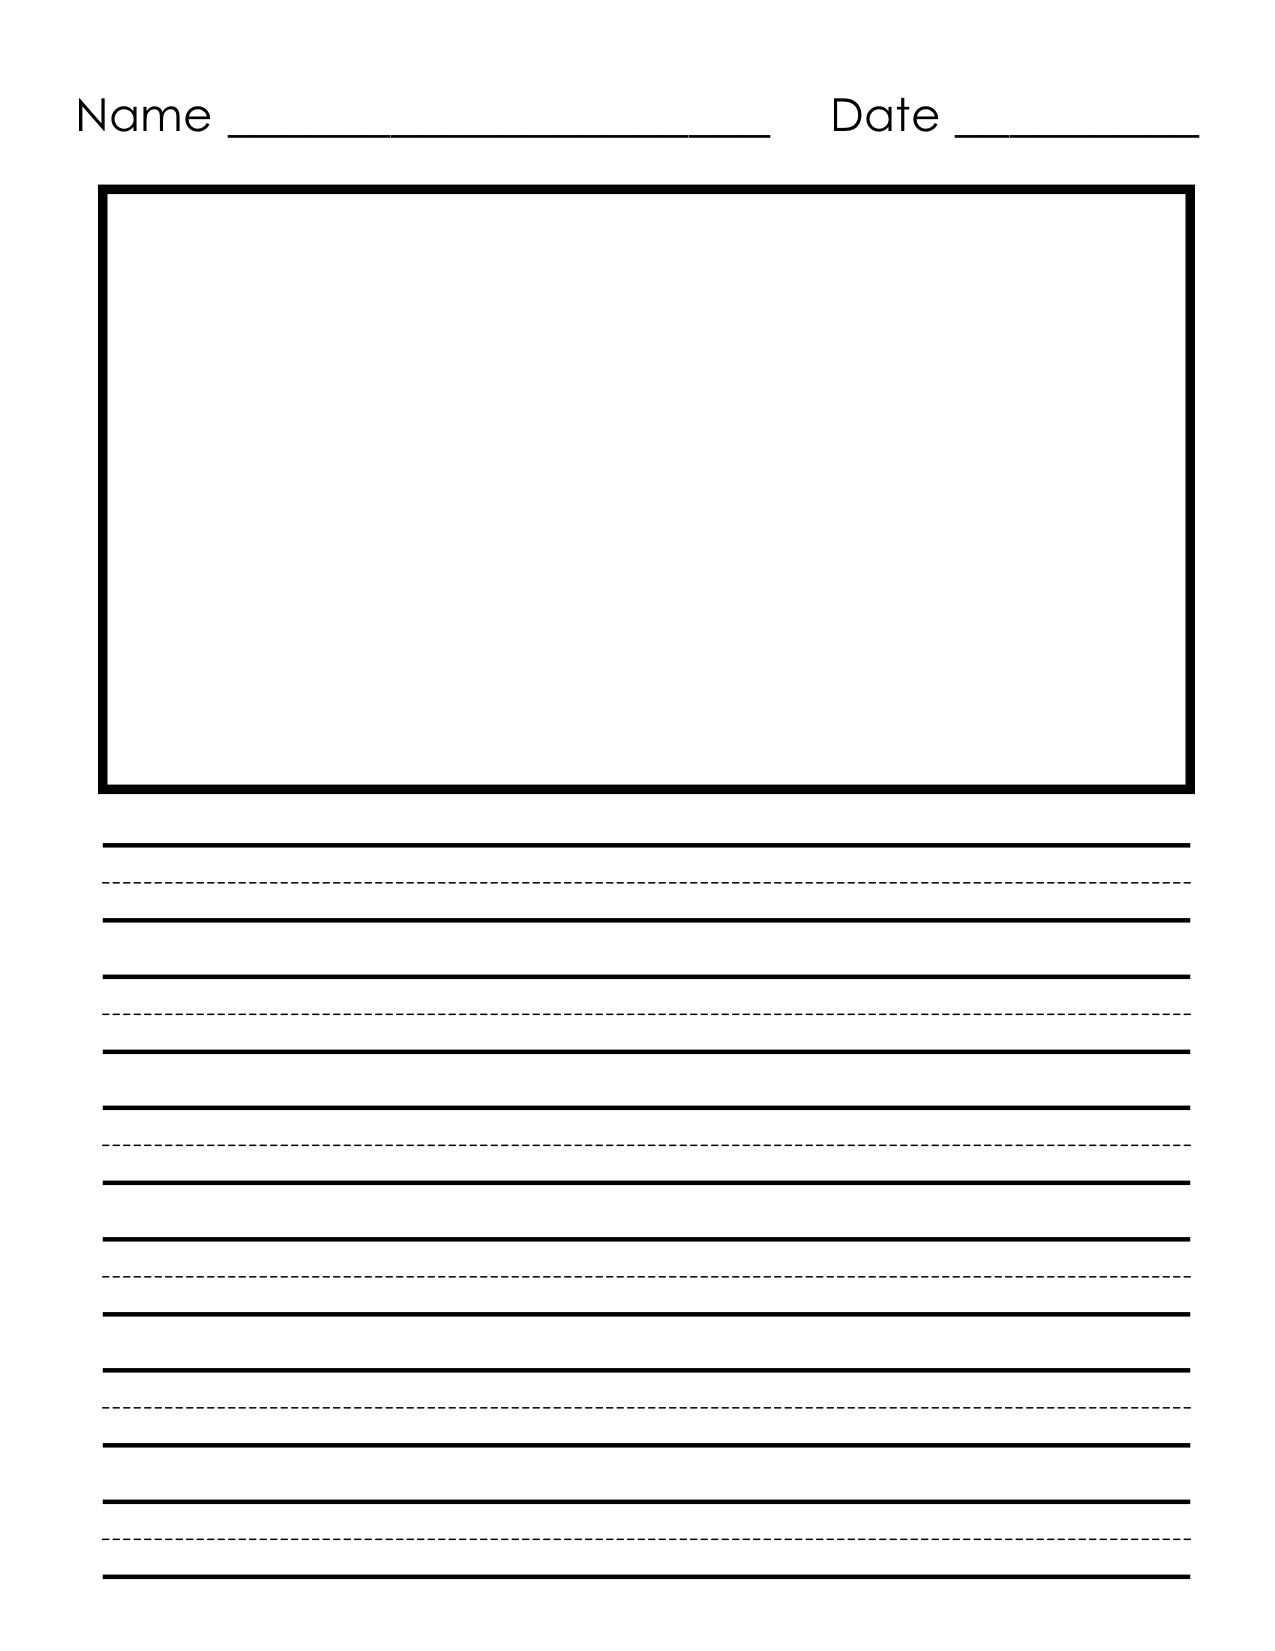 10 Primary Letter Writing Paper | Business Letter Pertaining To Blank Letter Writing Template For Kids